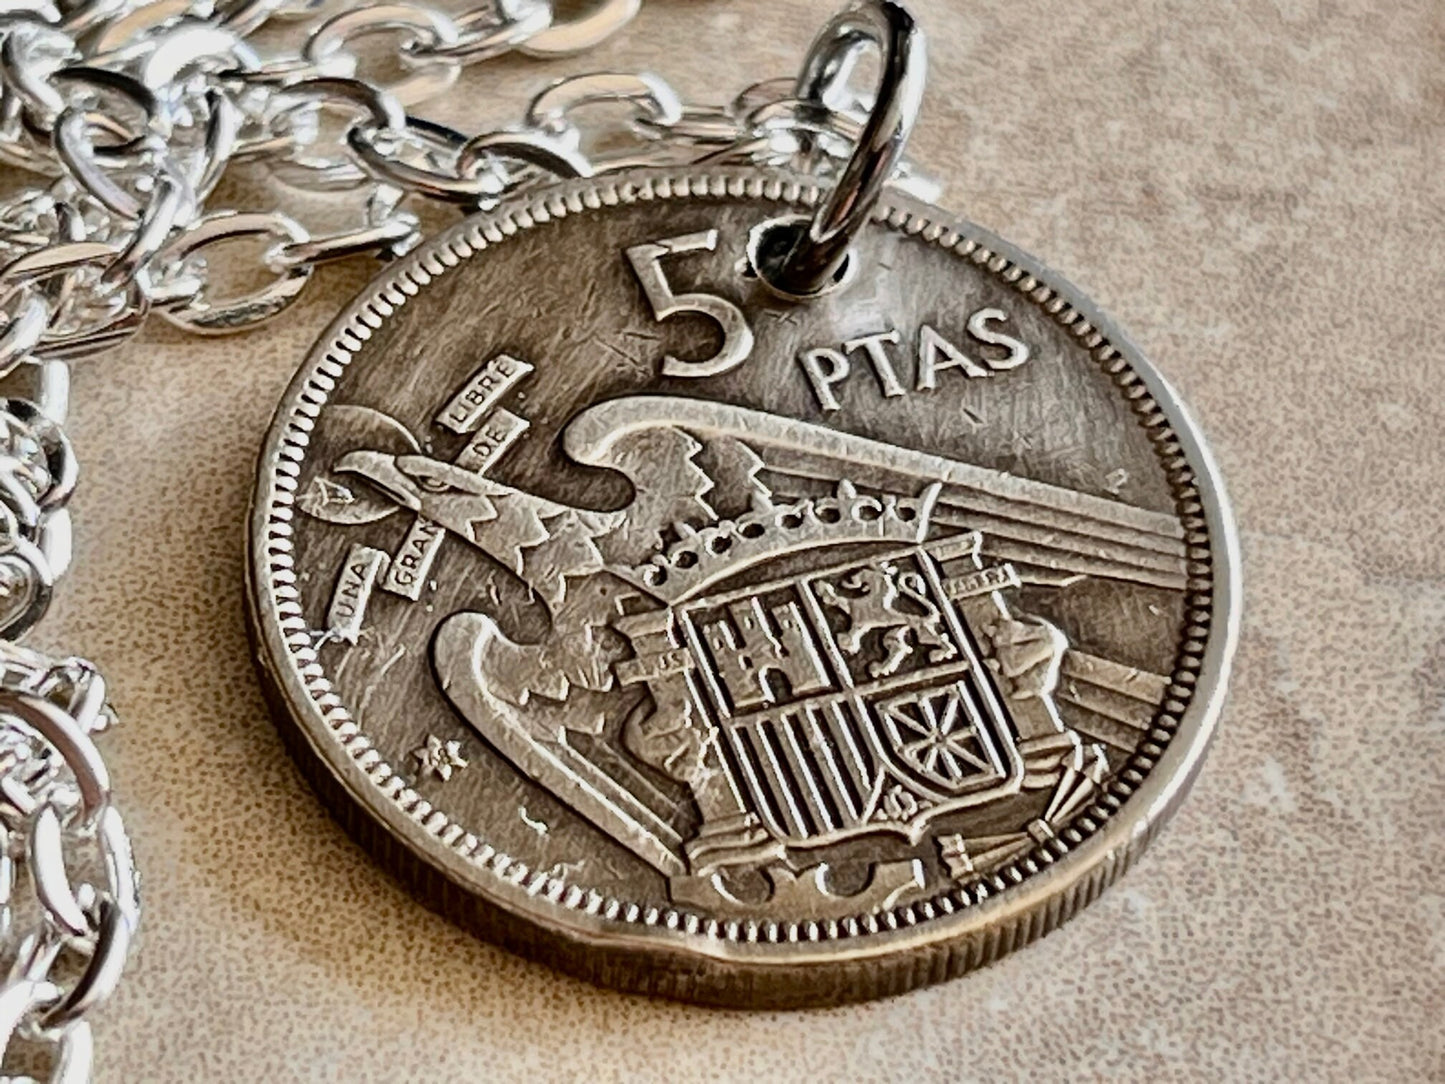 Spain Coin Pendant Spanish 5 Ptas 1957 Necklace Handmade Jewelry Gift For Friend Coin Charm Gift For Him, Her, World Coins Collector